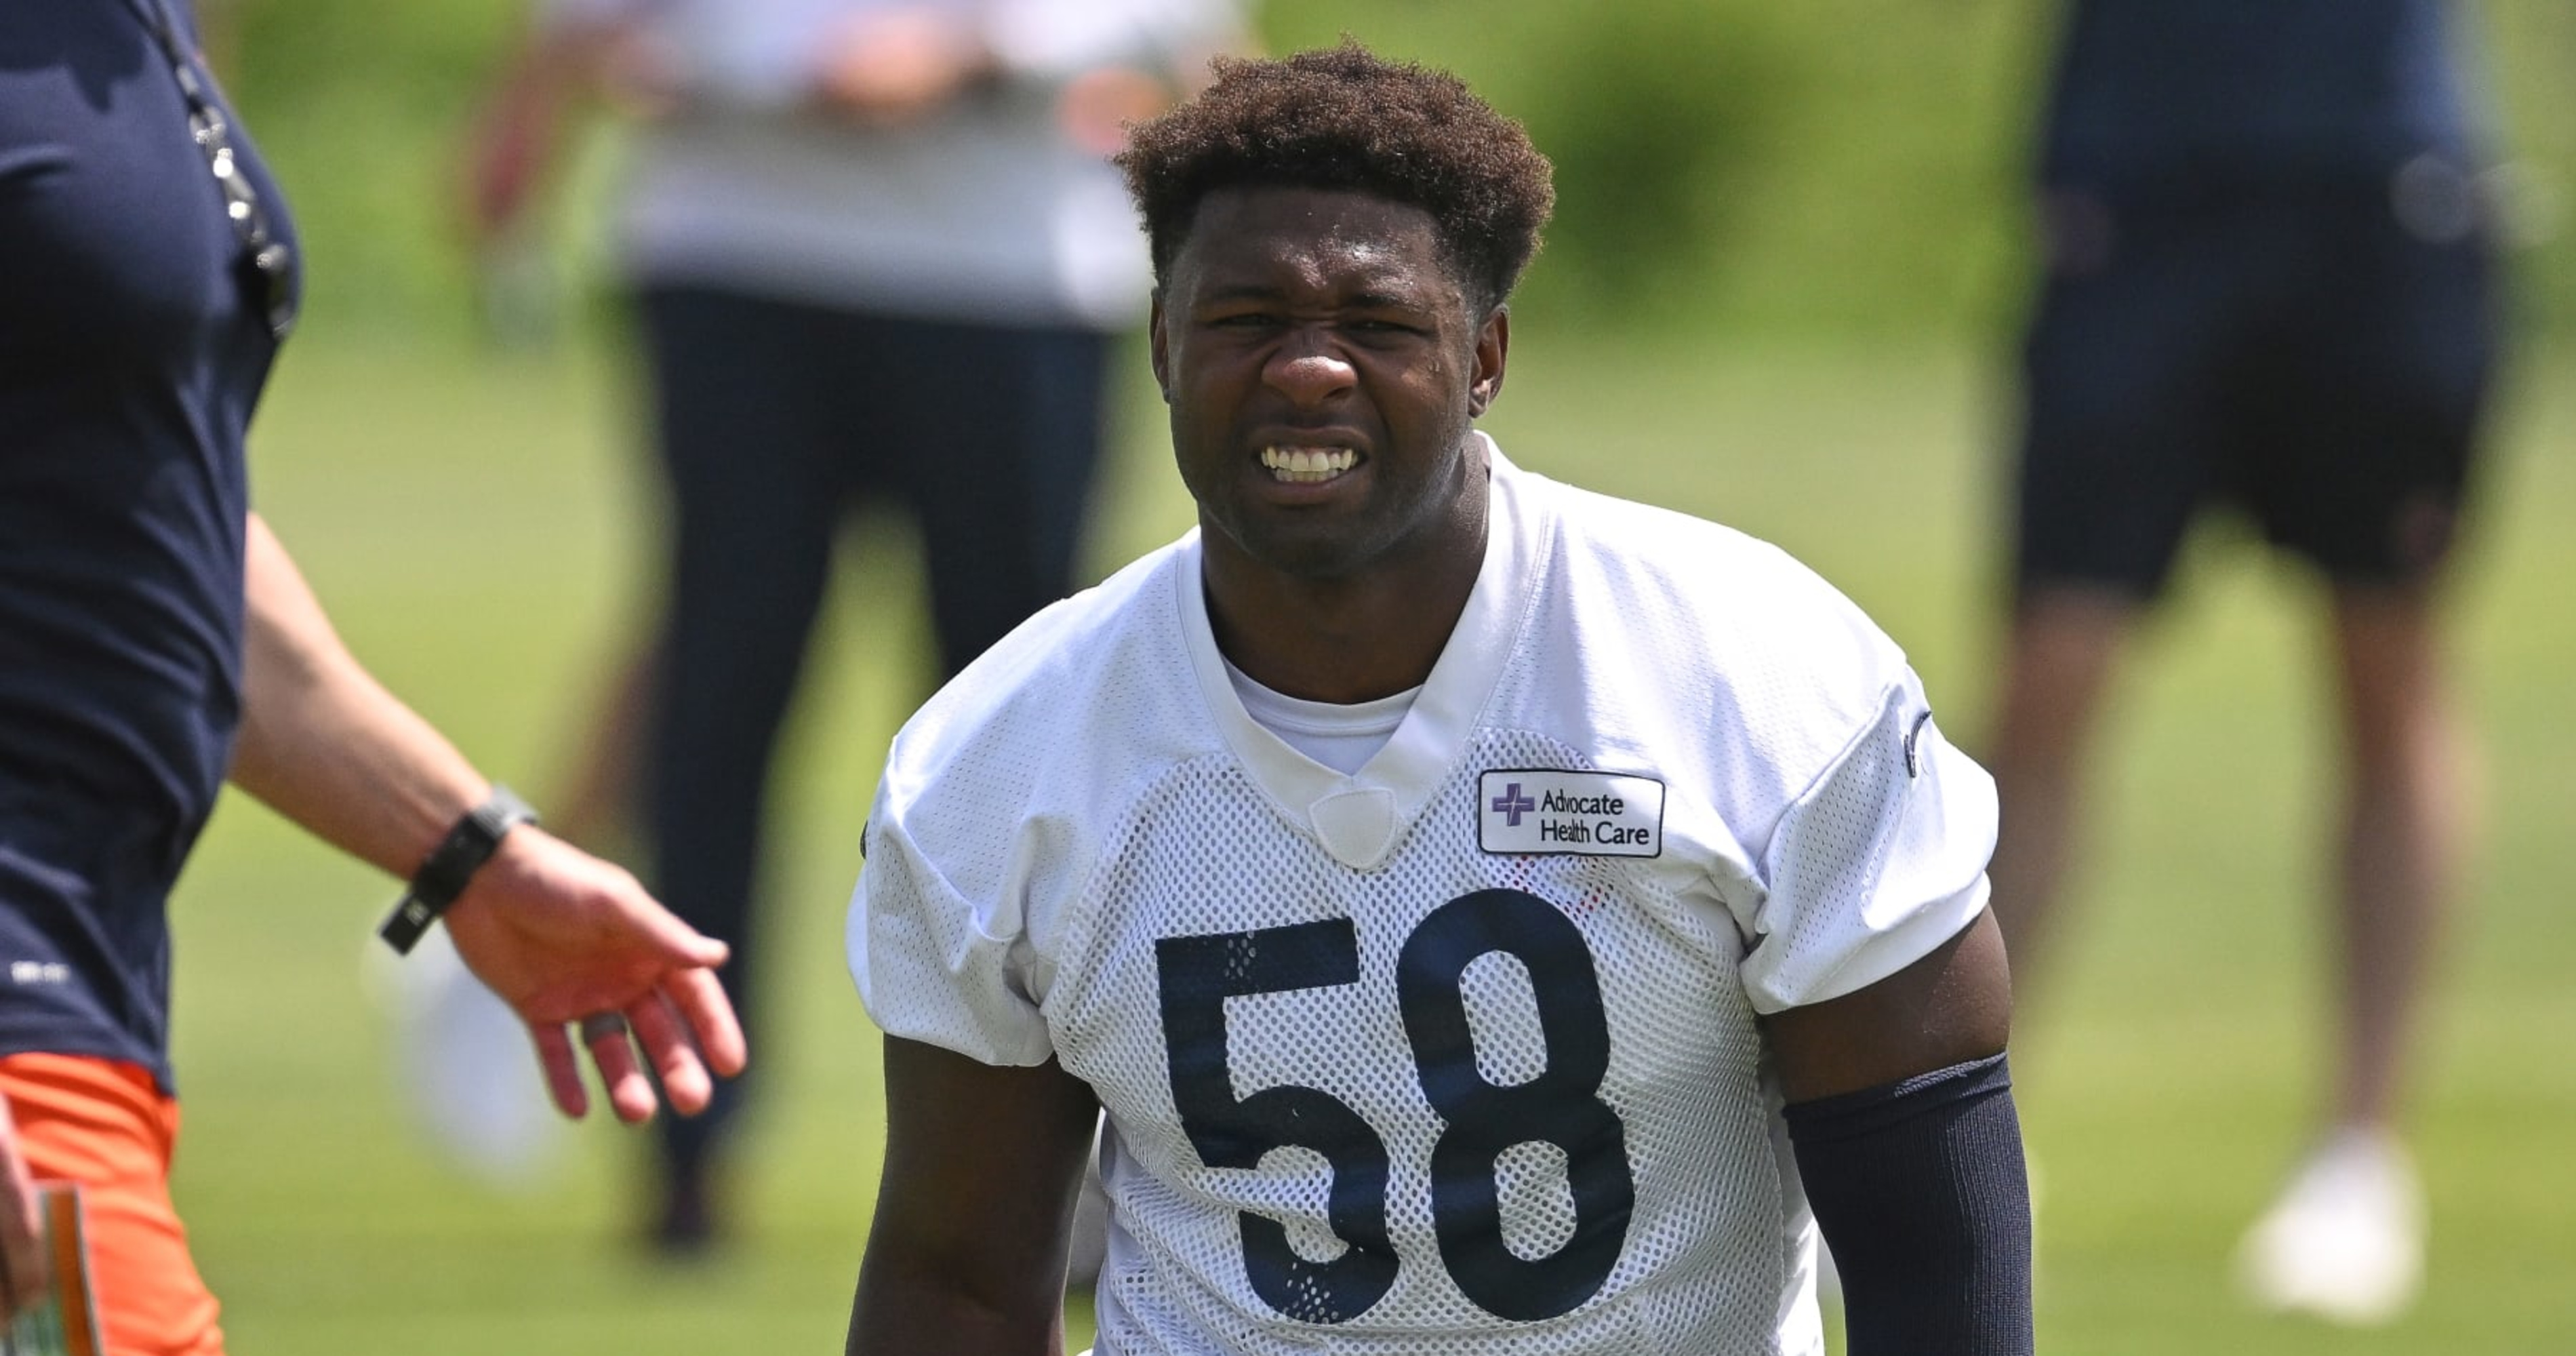 Bears Trade Rumors: NFL Teams Warned About Tampering With Roquan Smith